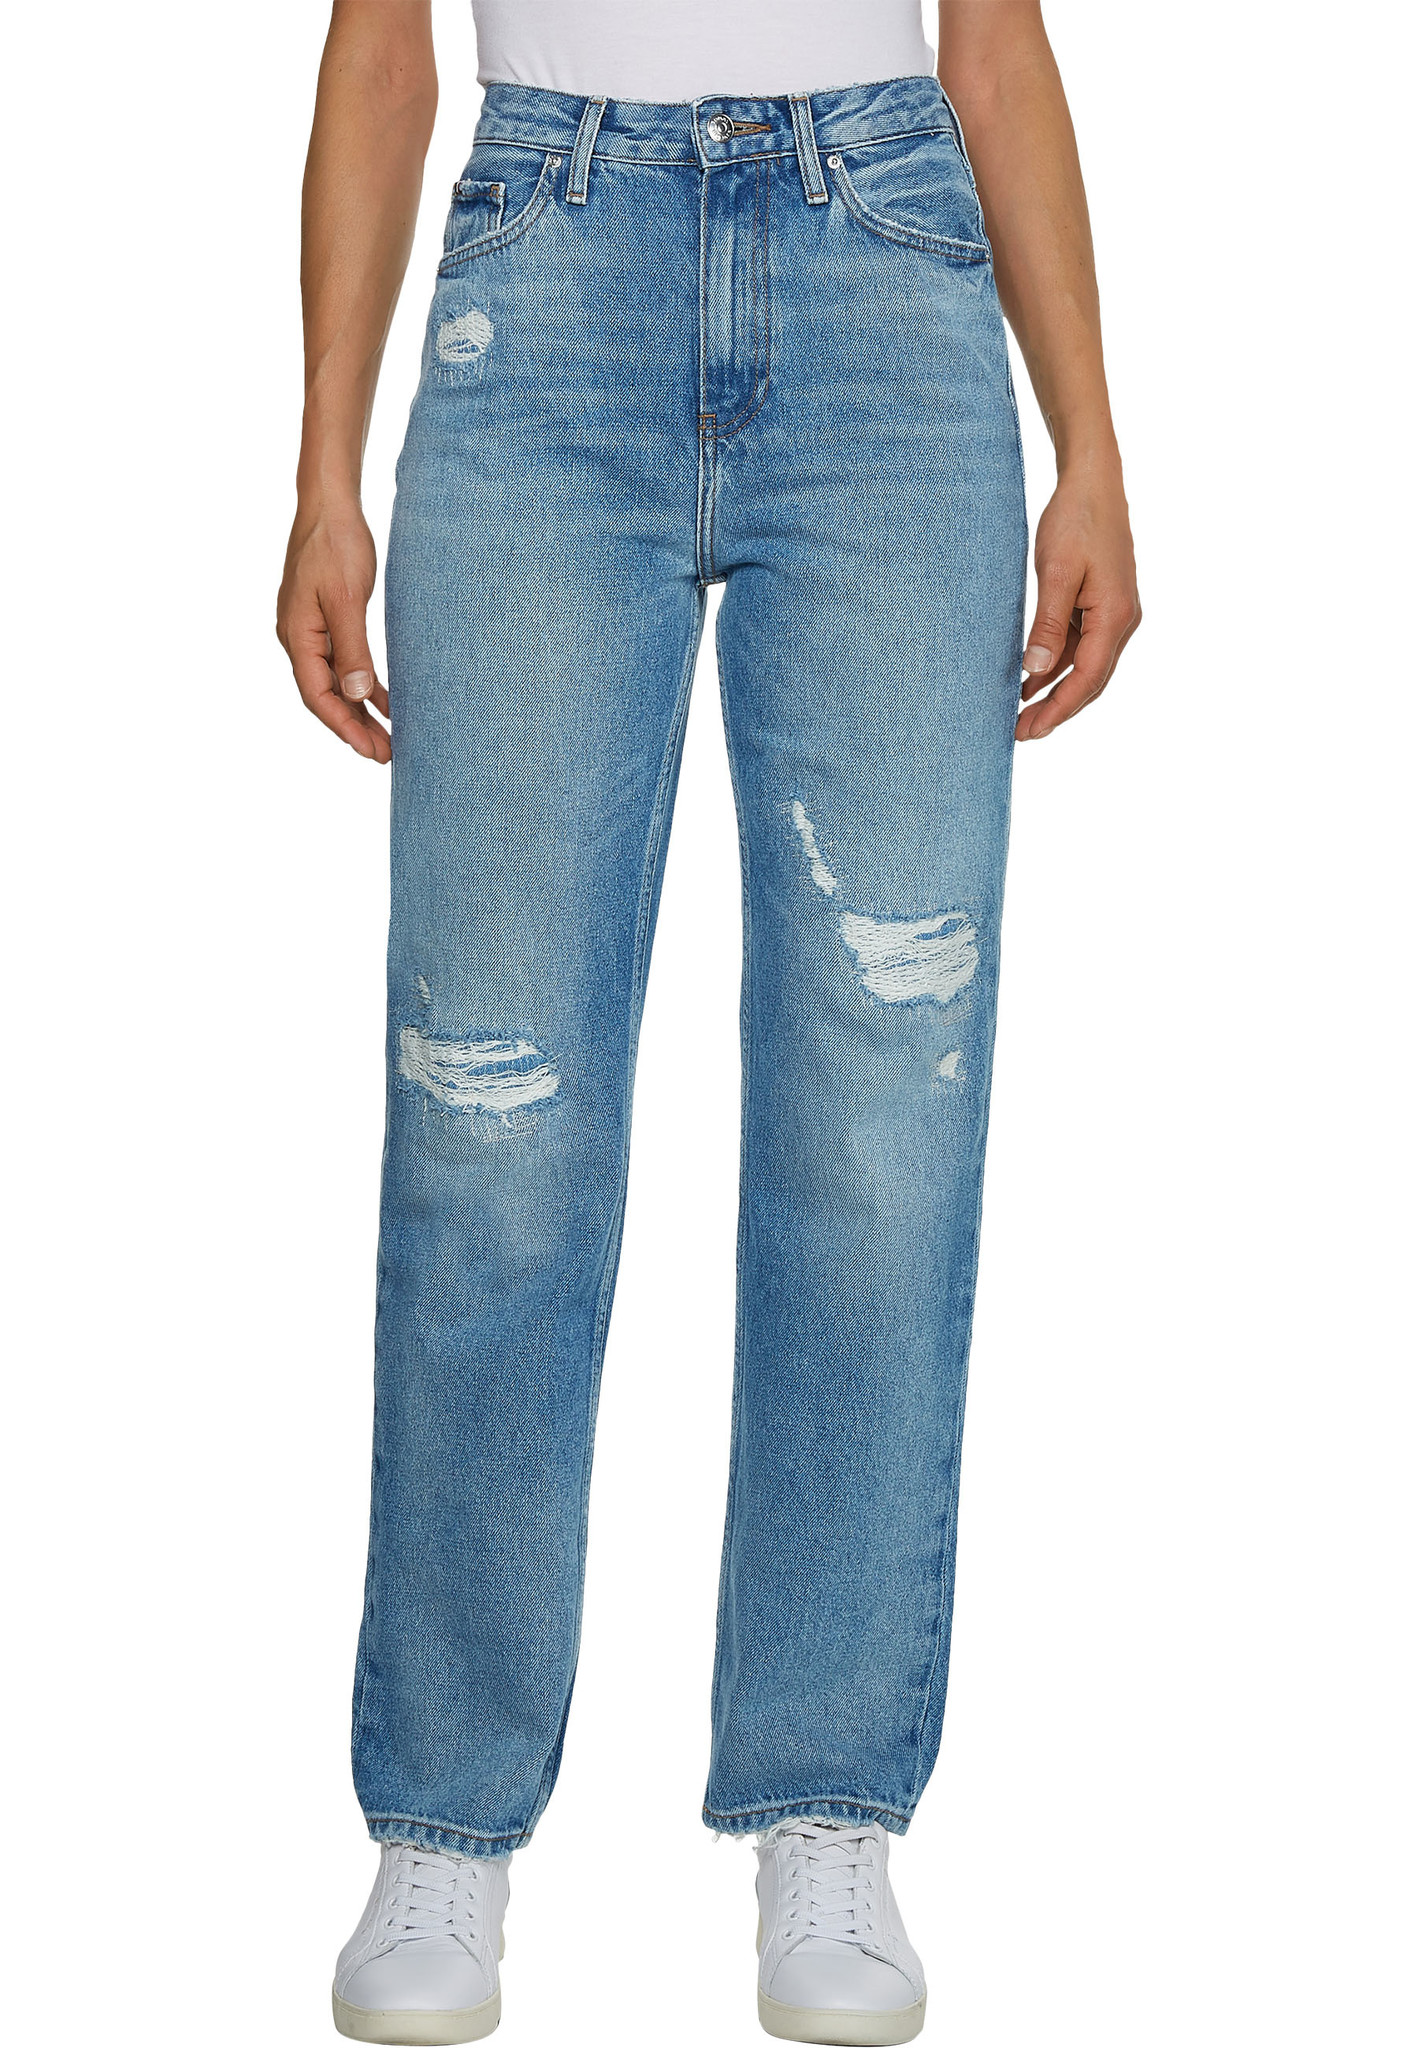 Tommy Hilfiger New Classic Straight Jeans Lichtblauw Dames maat 30/30